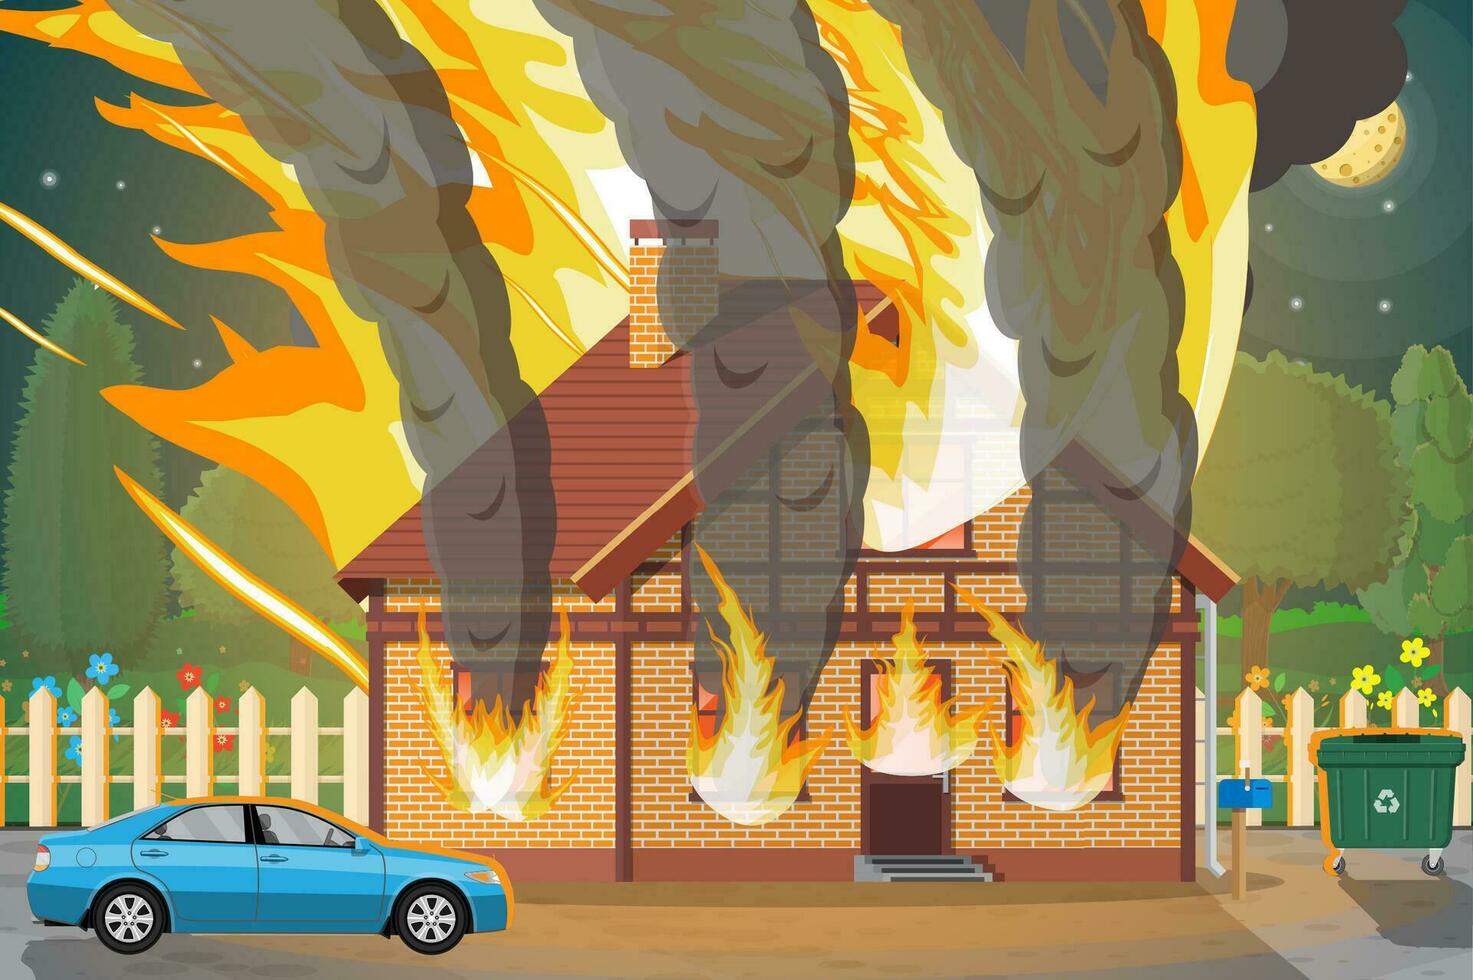 Wooden house burns. Fire in cottage. Orange flames in windows, black smoke with sparks. Property insurance. Nature landscape. Natural disaster concept. Vector illustration in flat style